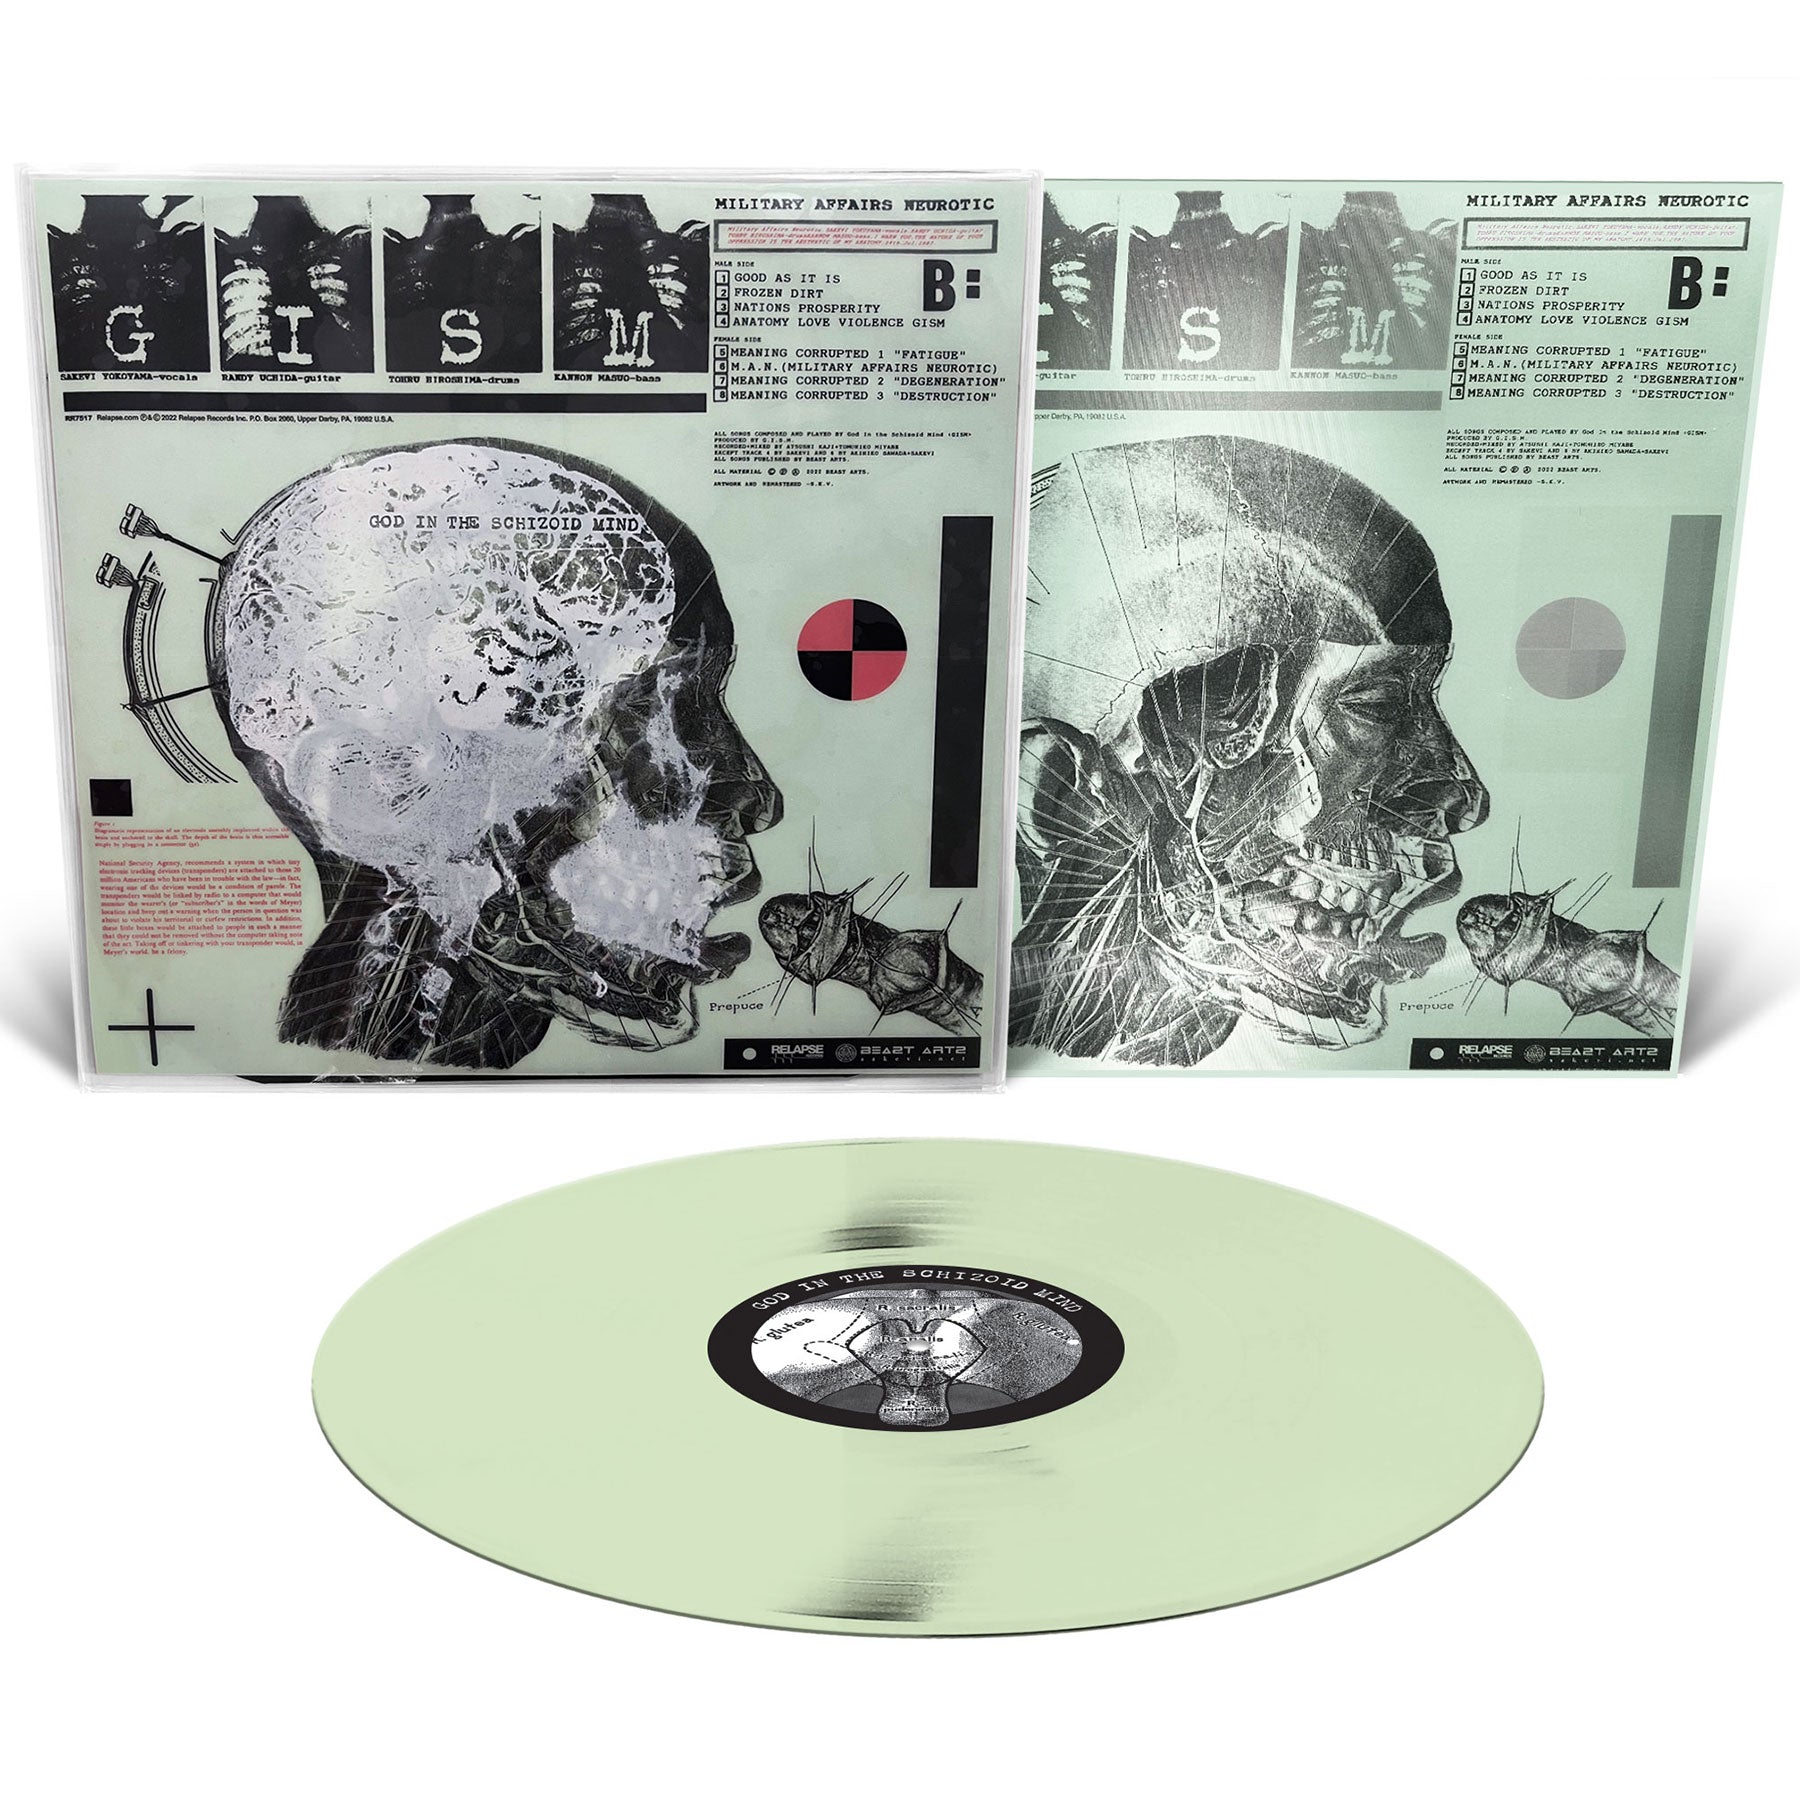 GISM "Military Affairs Neurotic (Reissue) LP + Lenticular Print Deluxe Package" Bundle